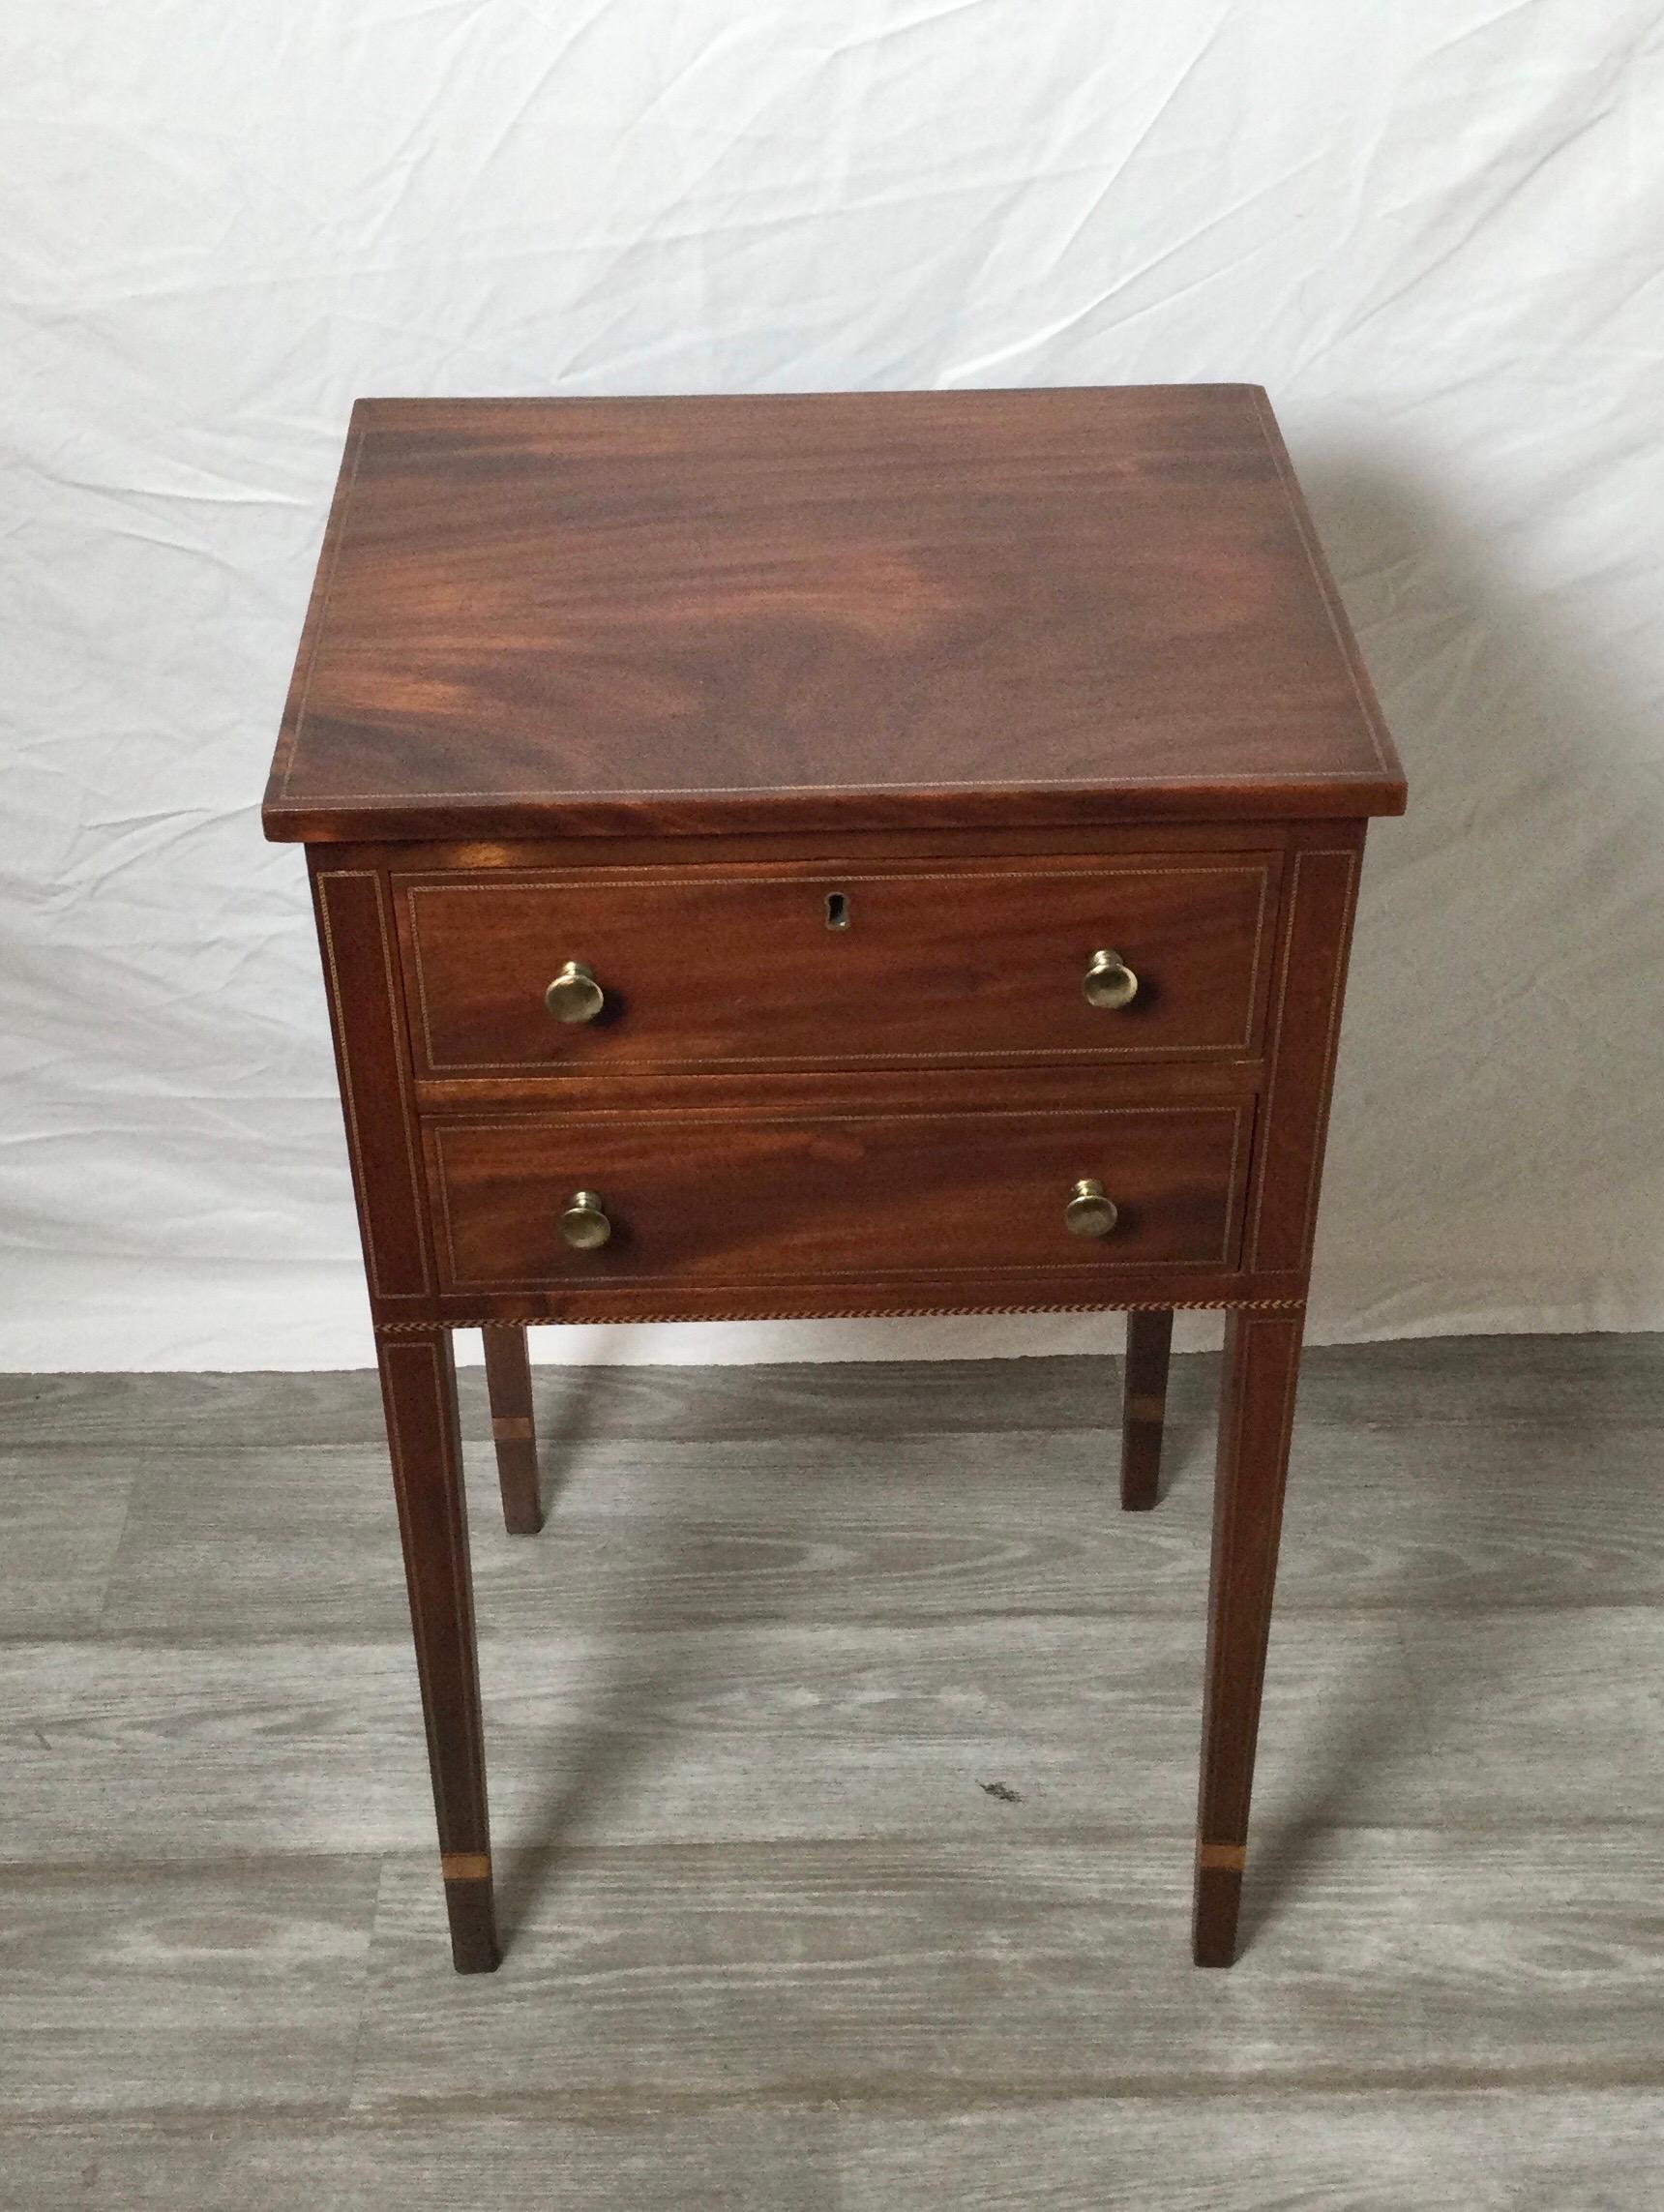 A well proportioned mahogany stand with tapered legs and nice string inlay along the sides with cuff feet detail.